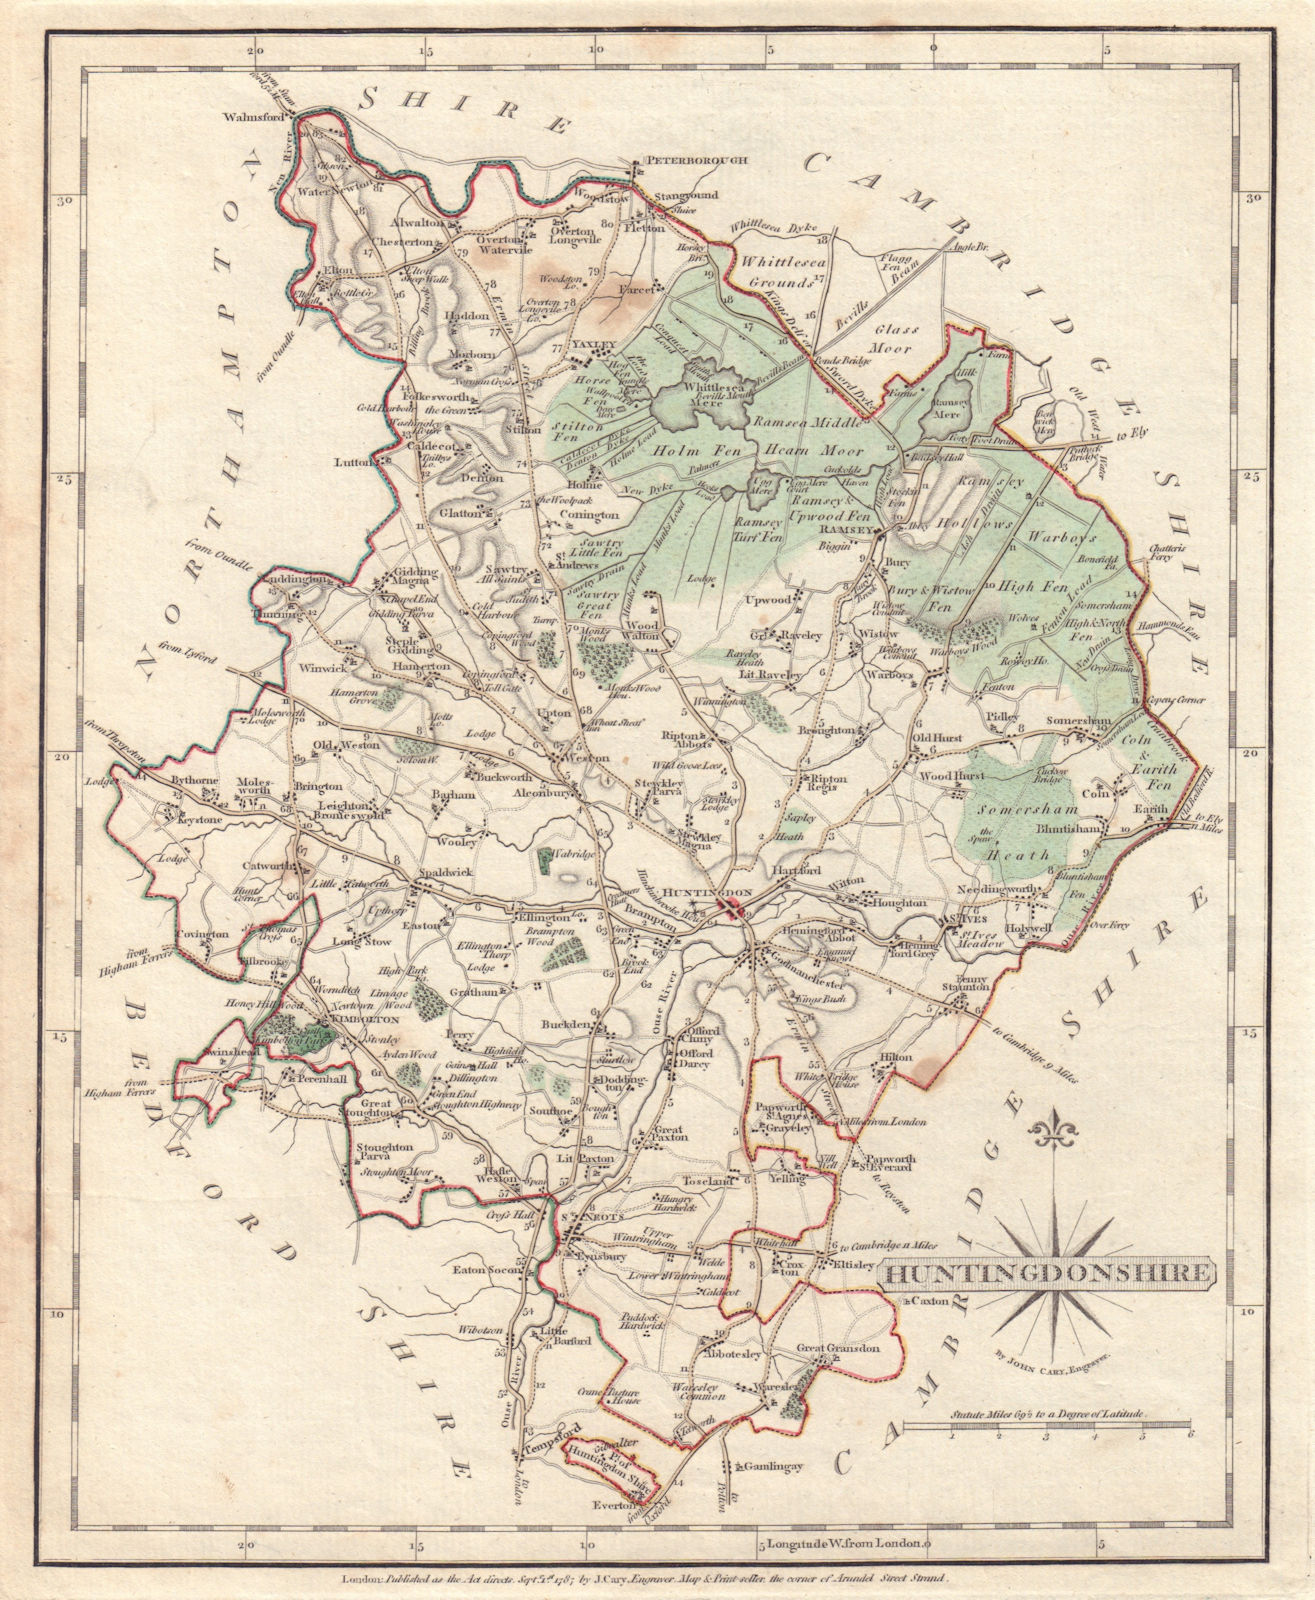 Antique county map of HUNTINGDONSHIRE by JOHN CARY. Original outline colour 1787